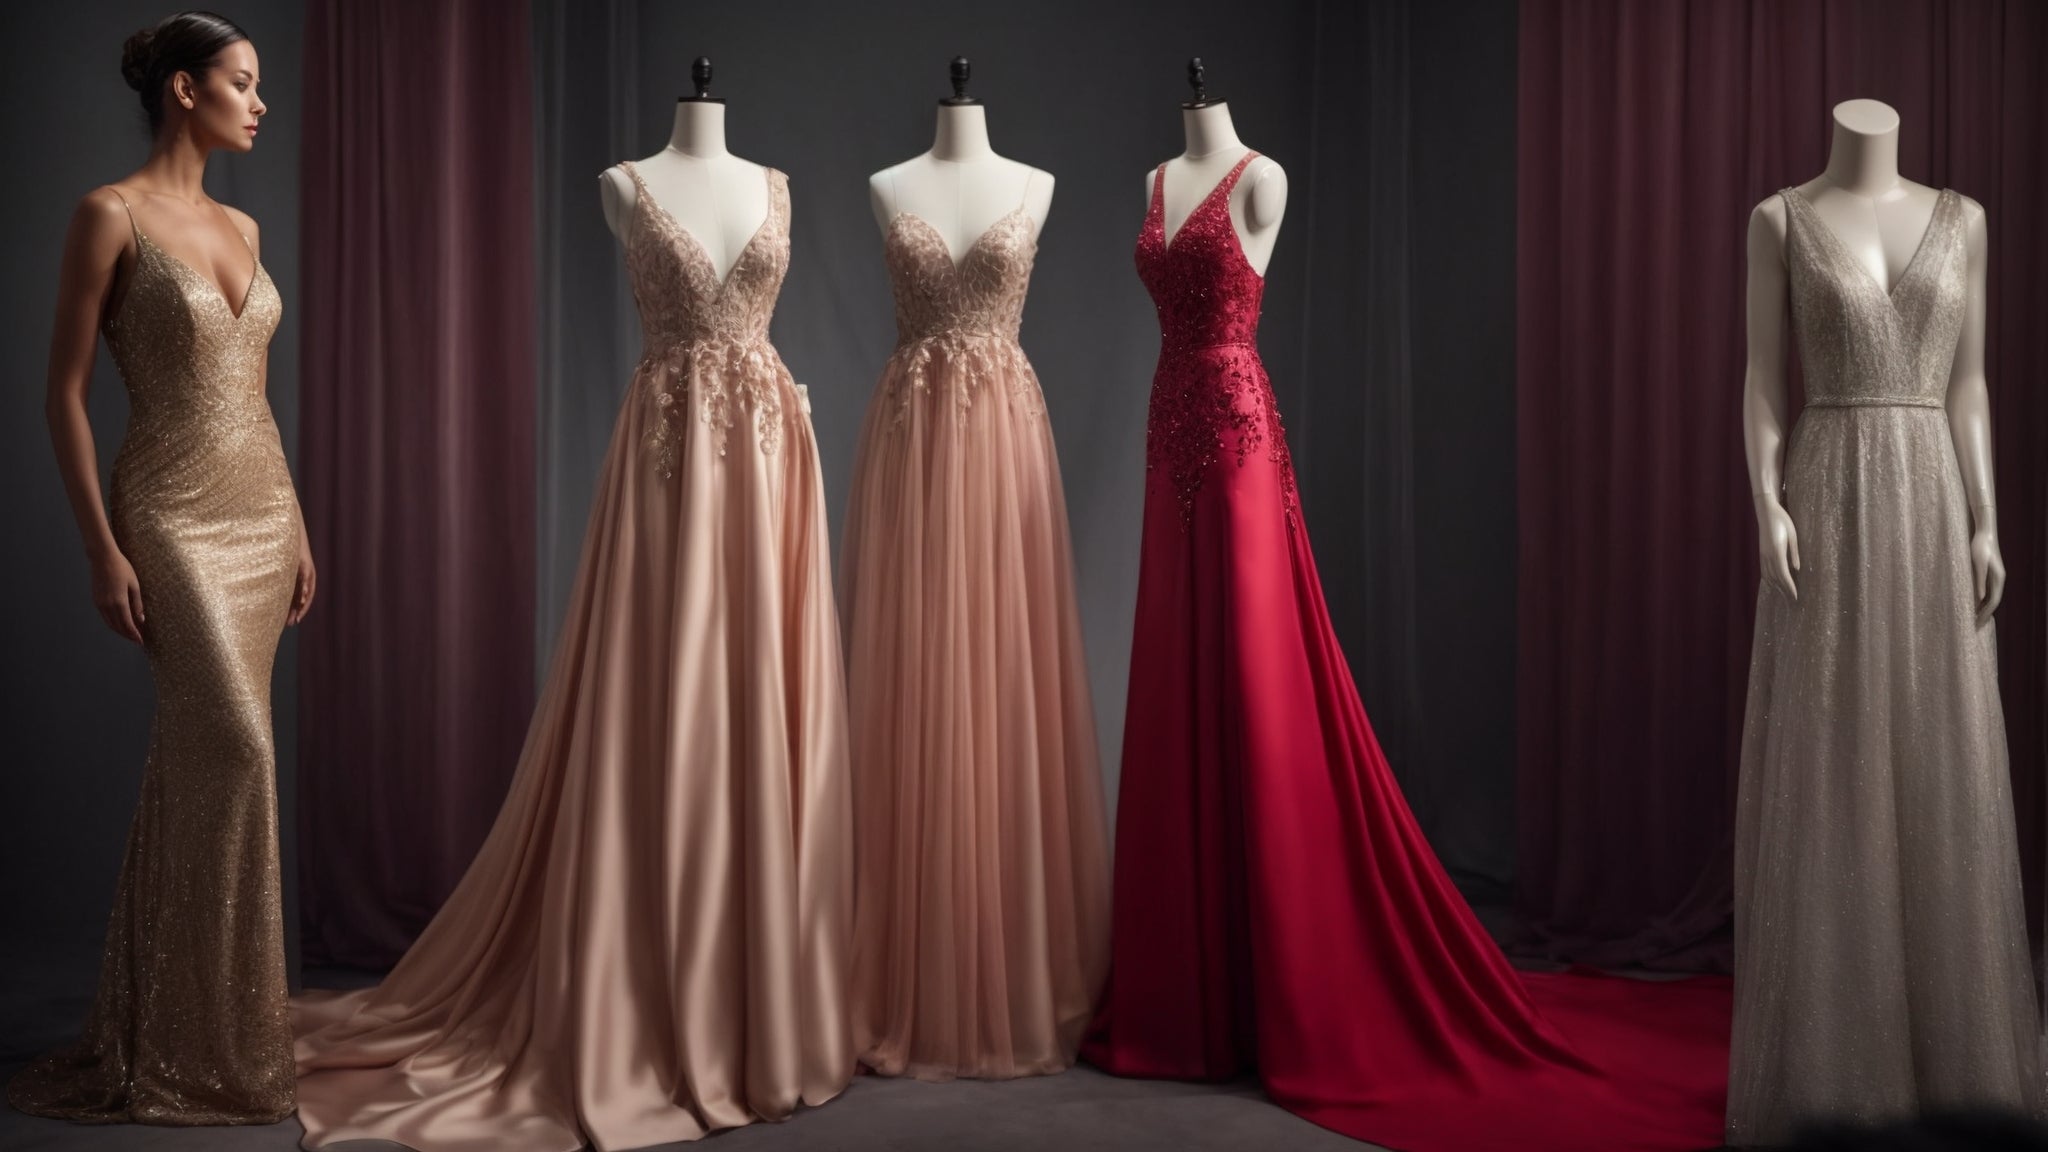 Gown vs. Cocktail Dress: What's the Difference?